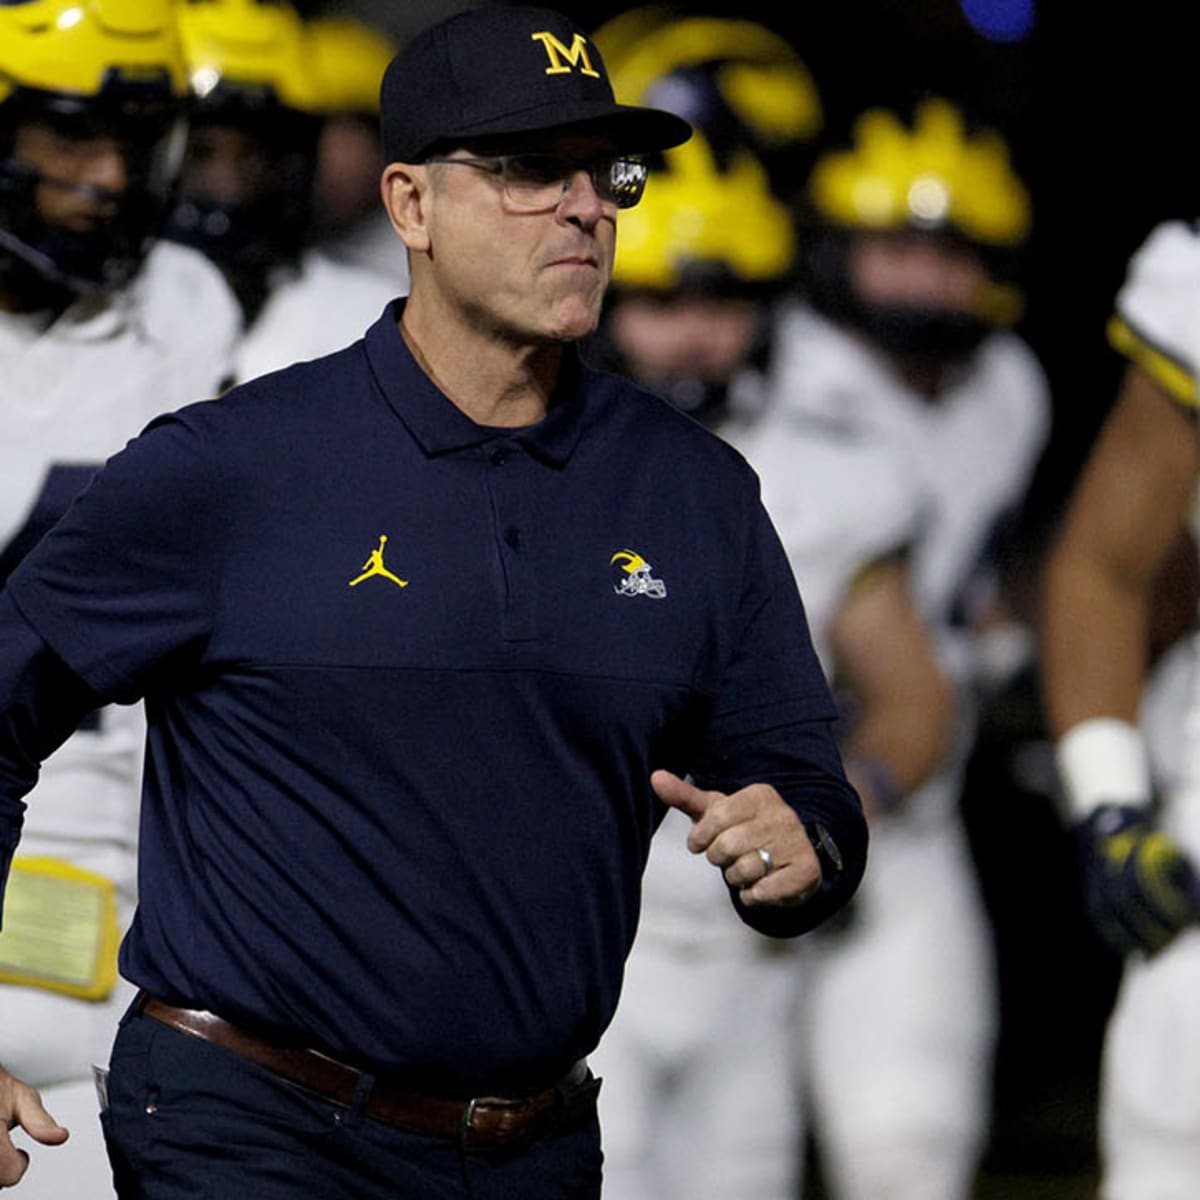 Jim Harbaugh: Michigan Football Offers $125 Million Contract With No-NFL  Clause, per Report - Sports Illustrated